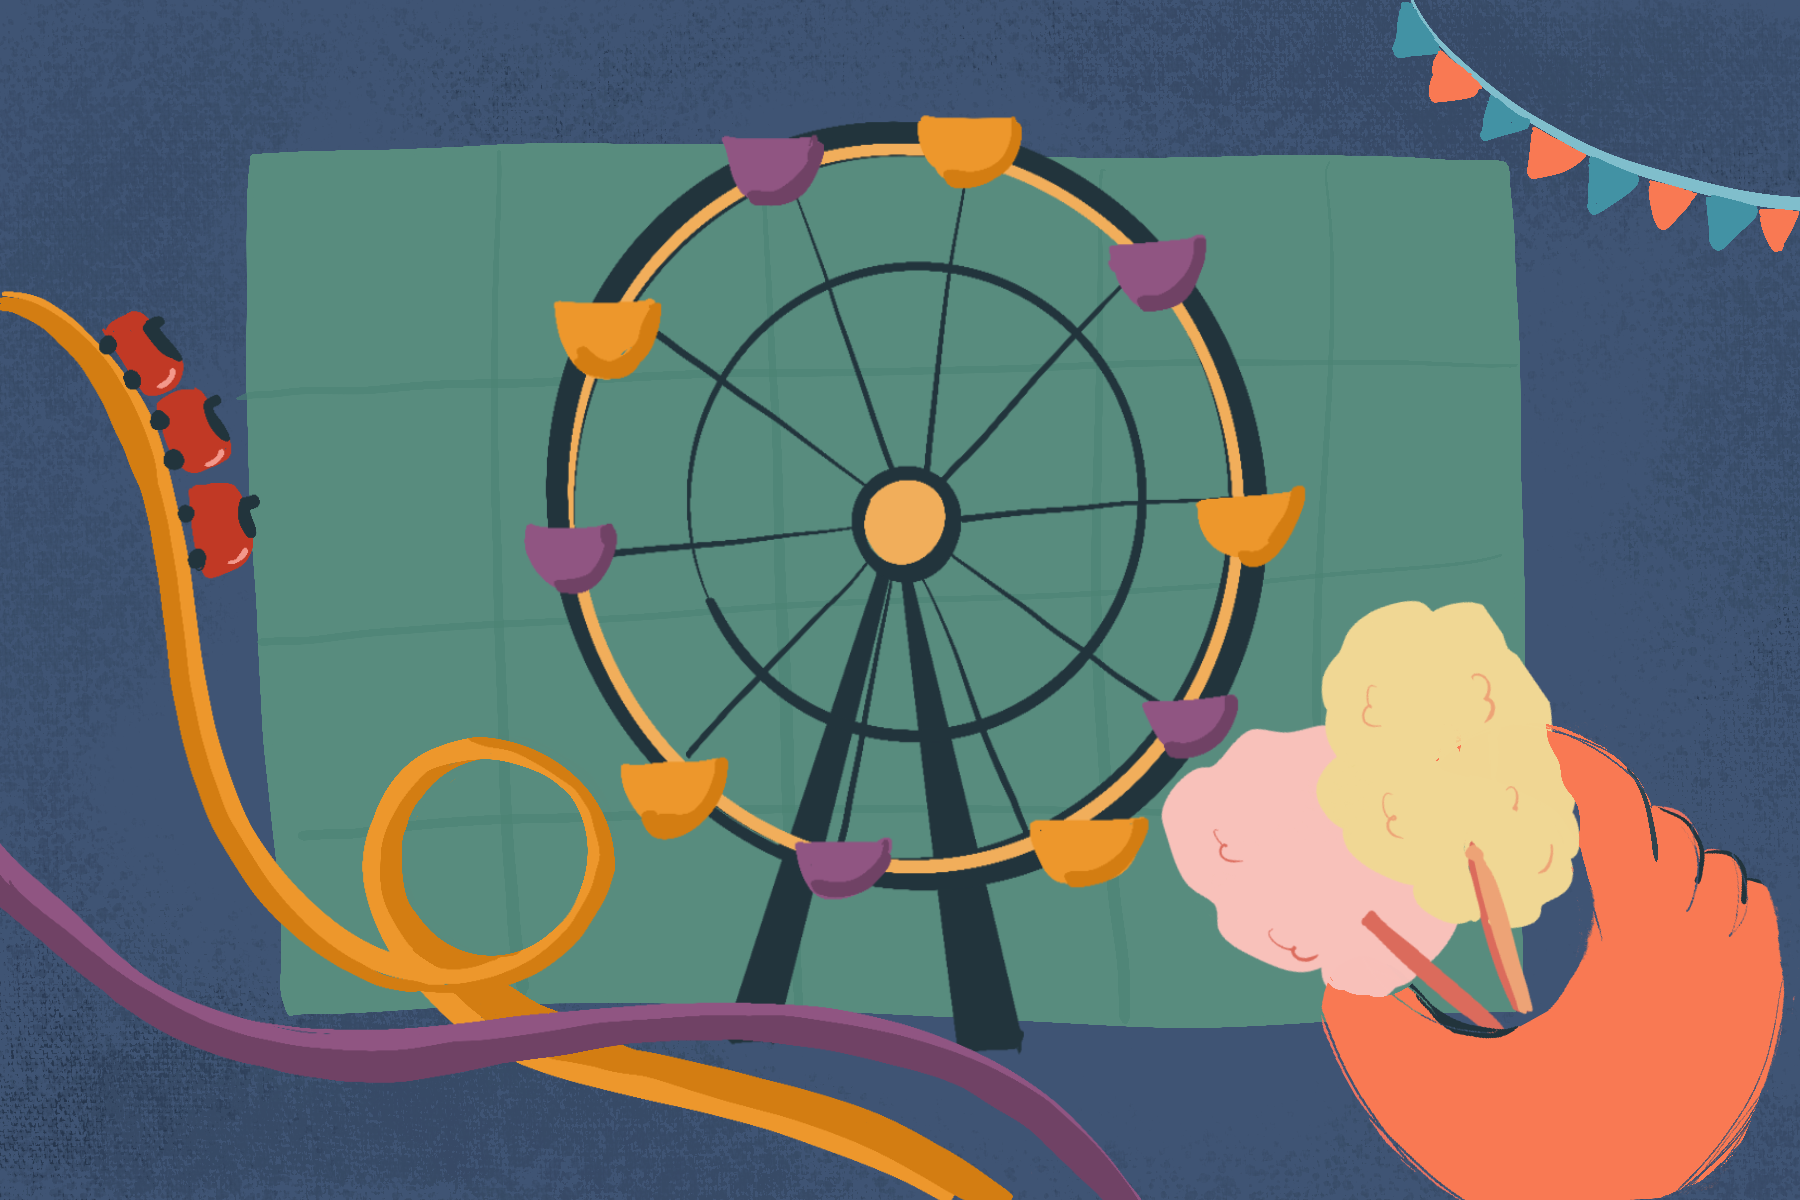 An illustration showing Weavly scene with a ferris wheel, rollercoaster rides and a hand holding two cotton candies. 